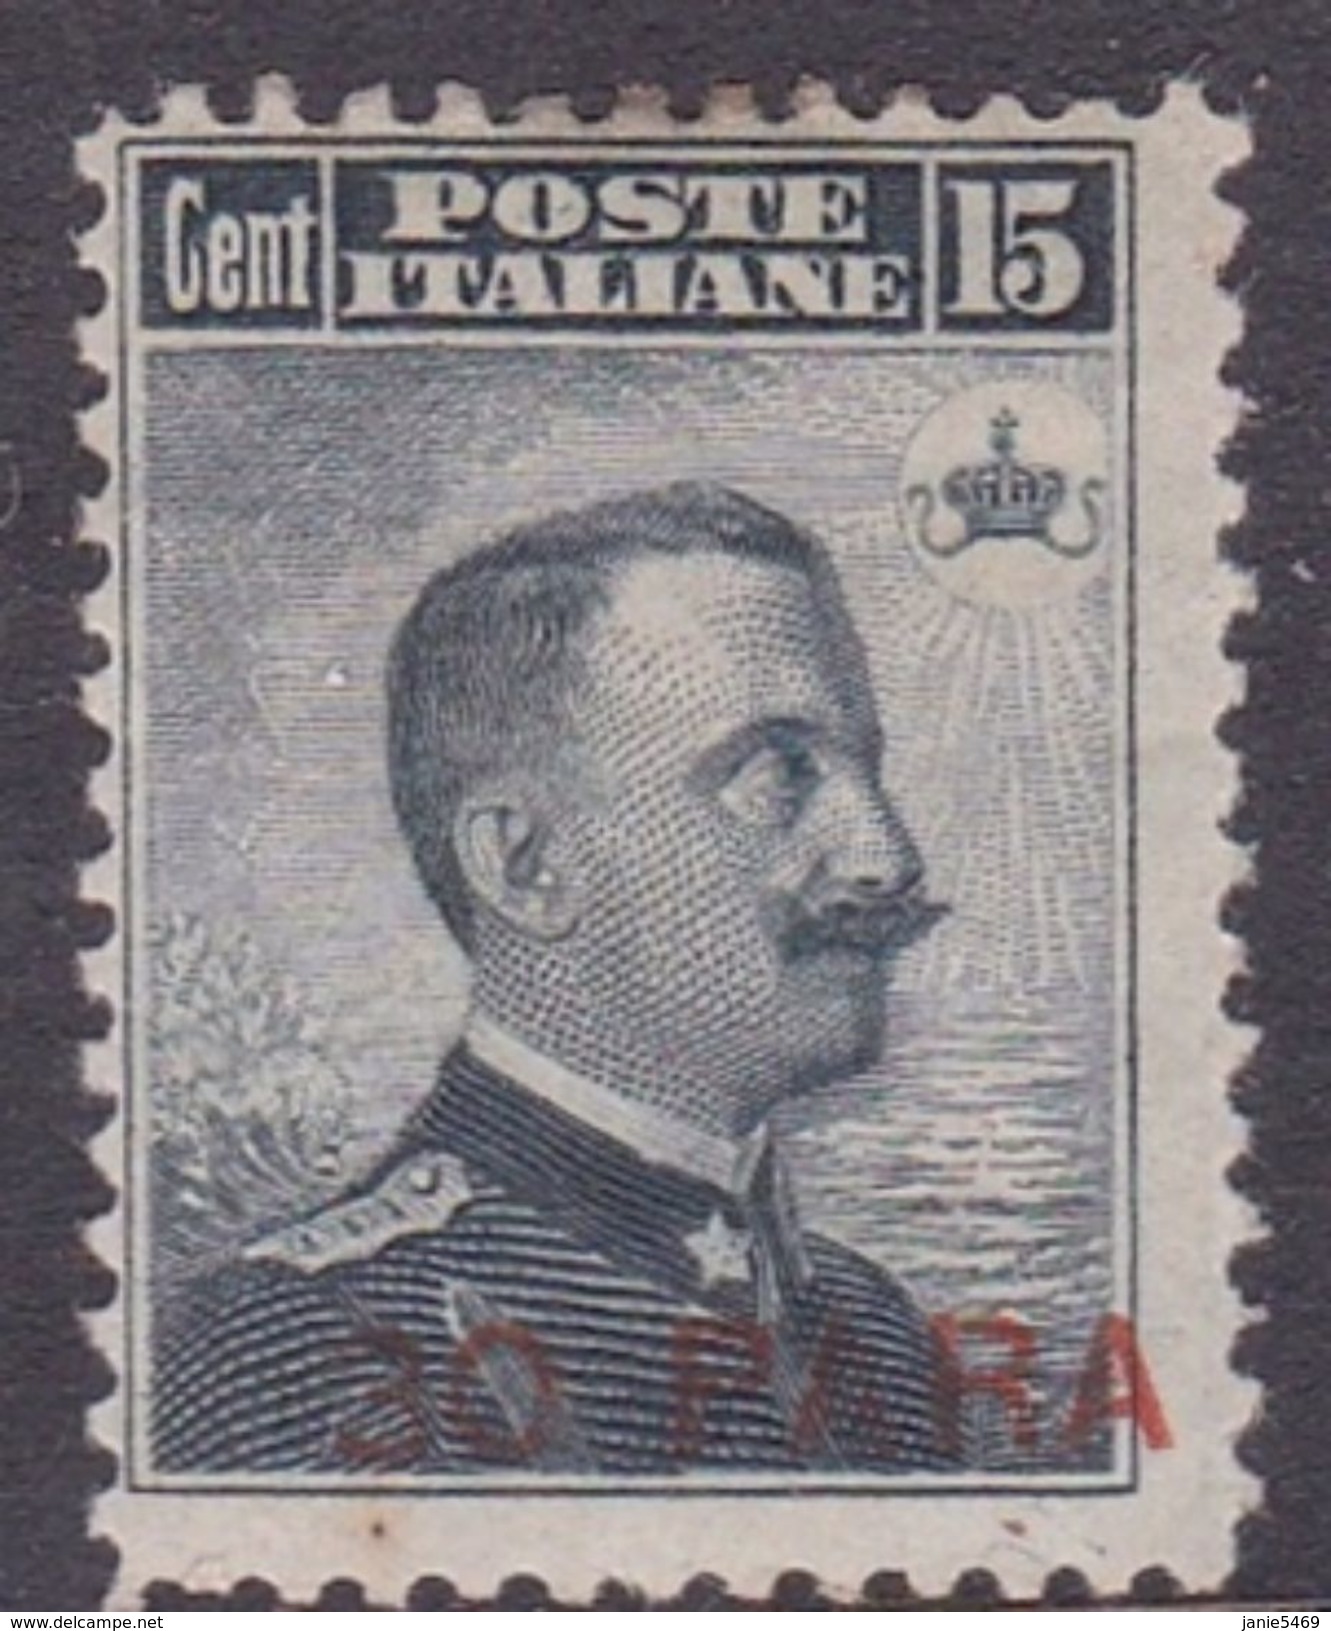 Italian Post Offices In The Levant, Costantinople S 15 1908 30 Para On 15c Grey, Mint Hinged - Emisiones Generales